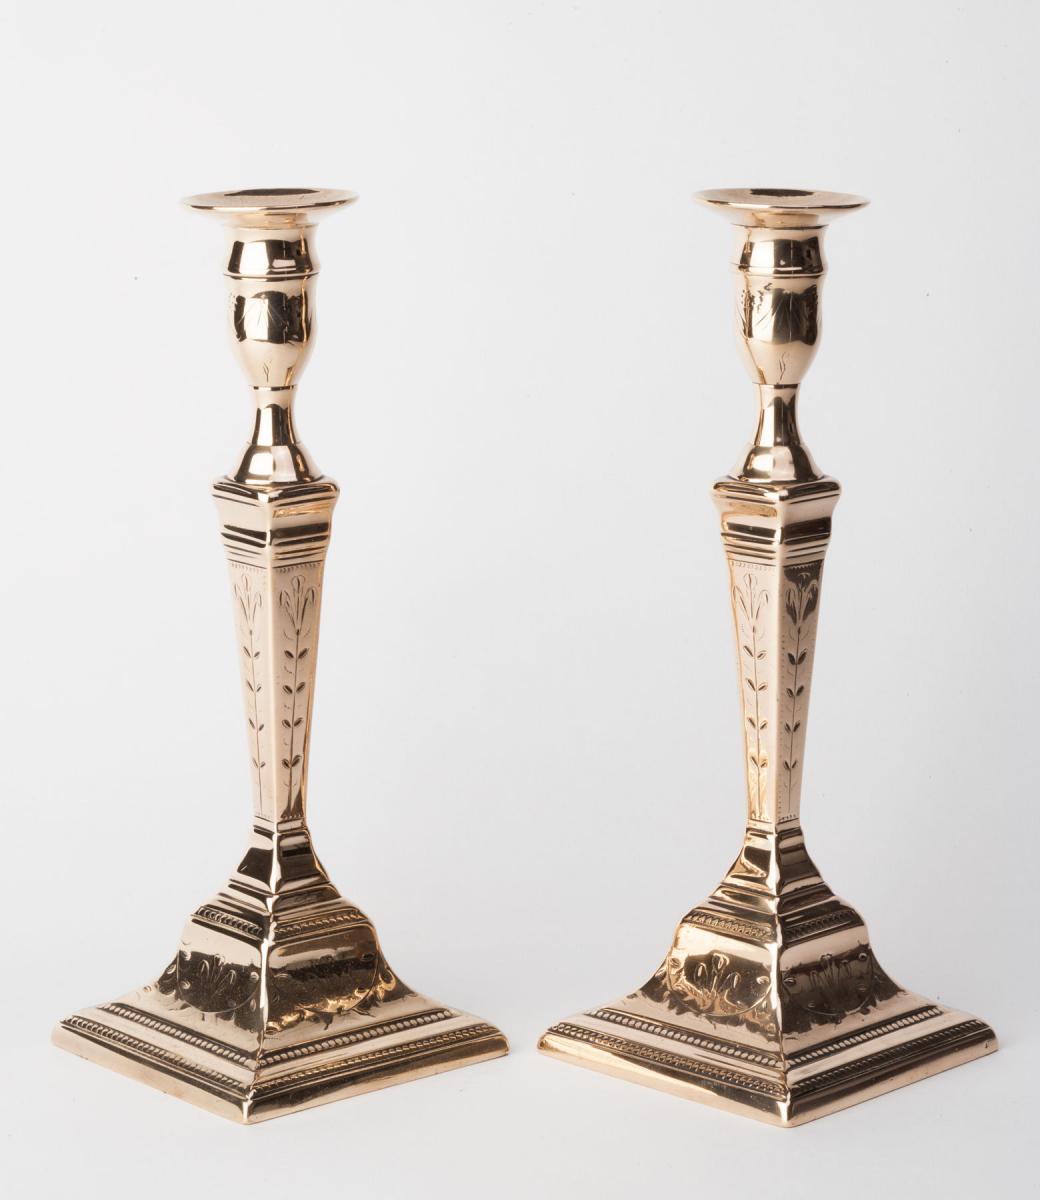 Prince of Wales Candlesticks